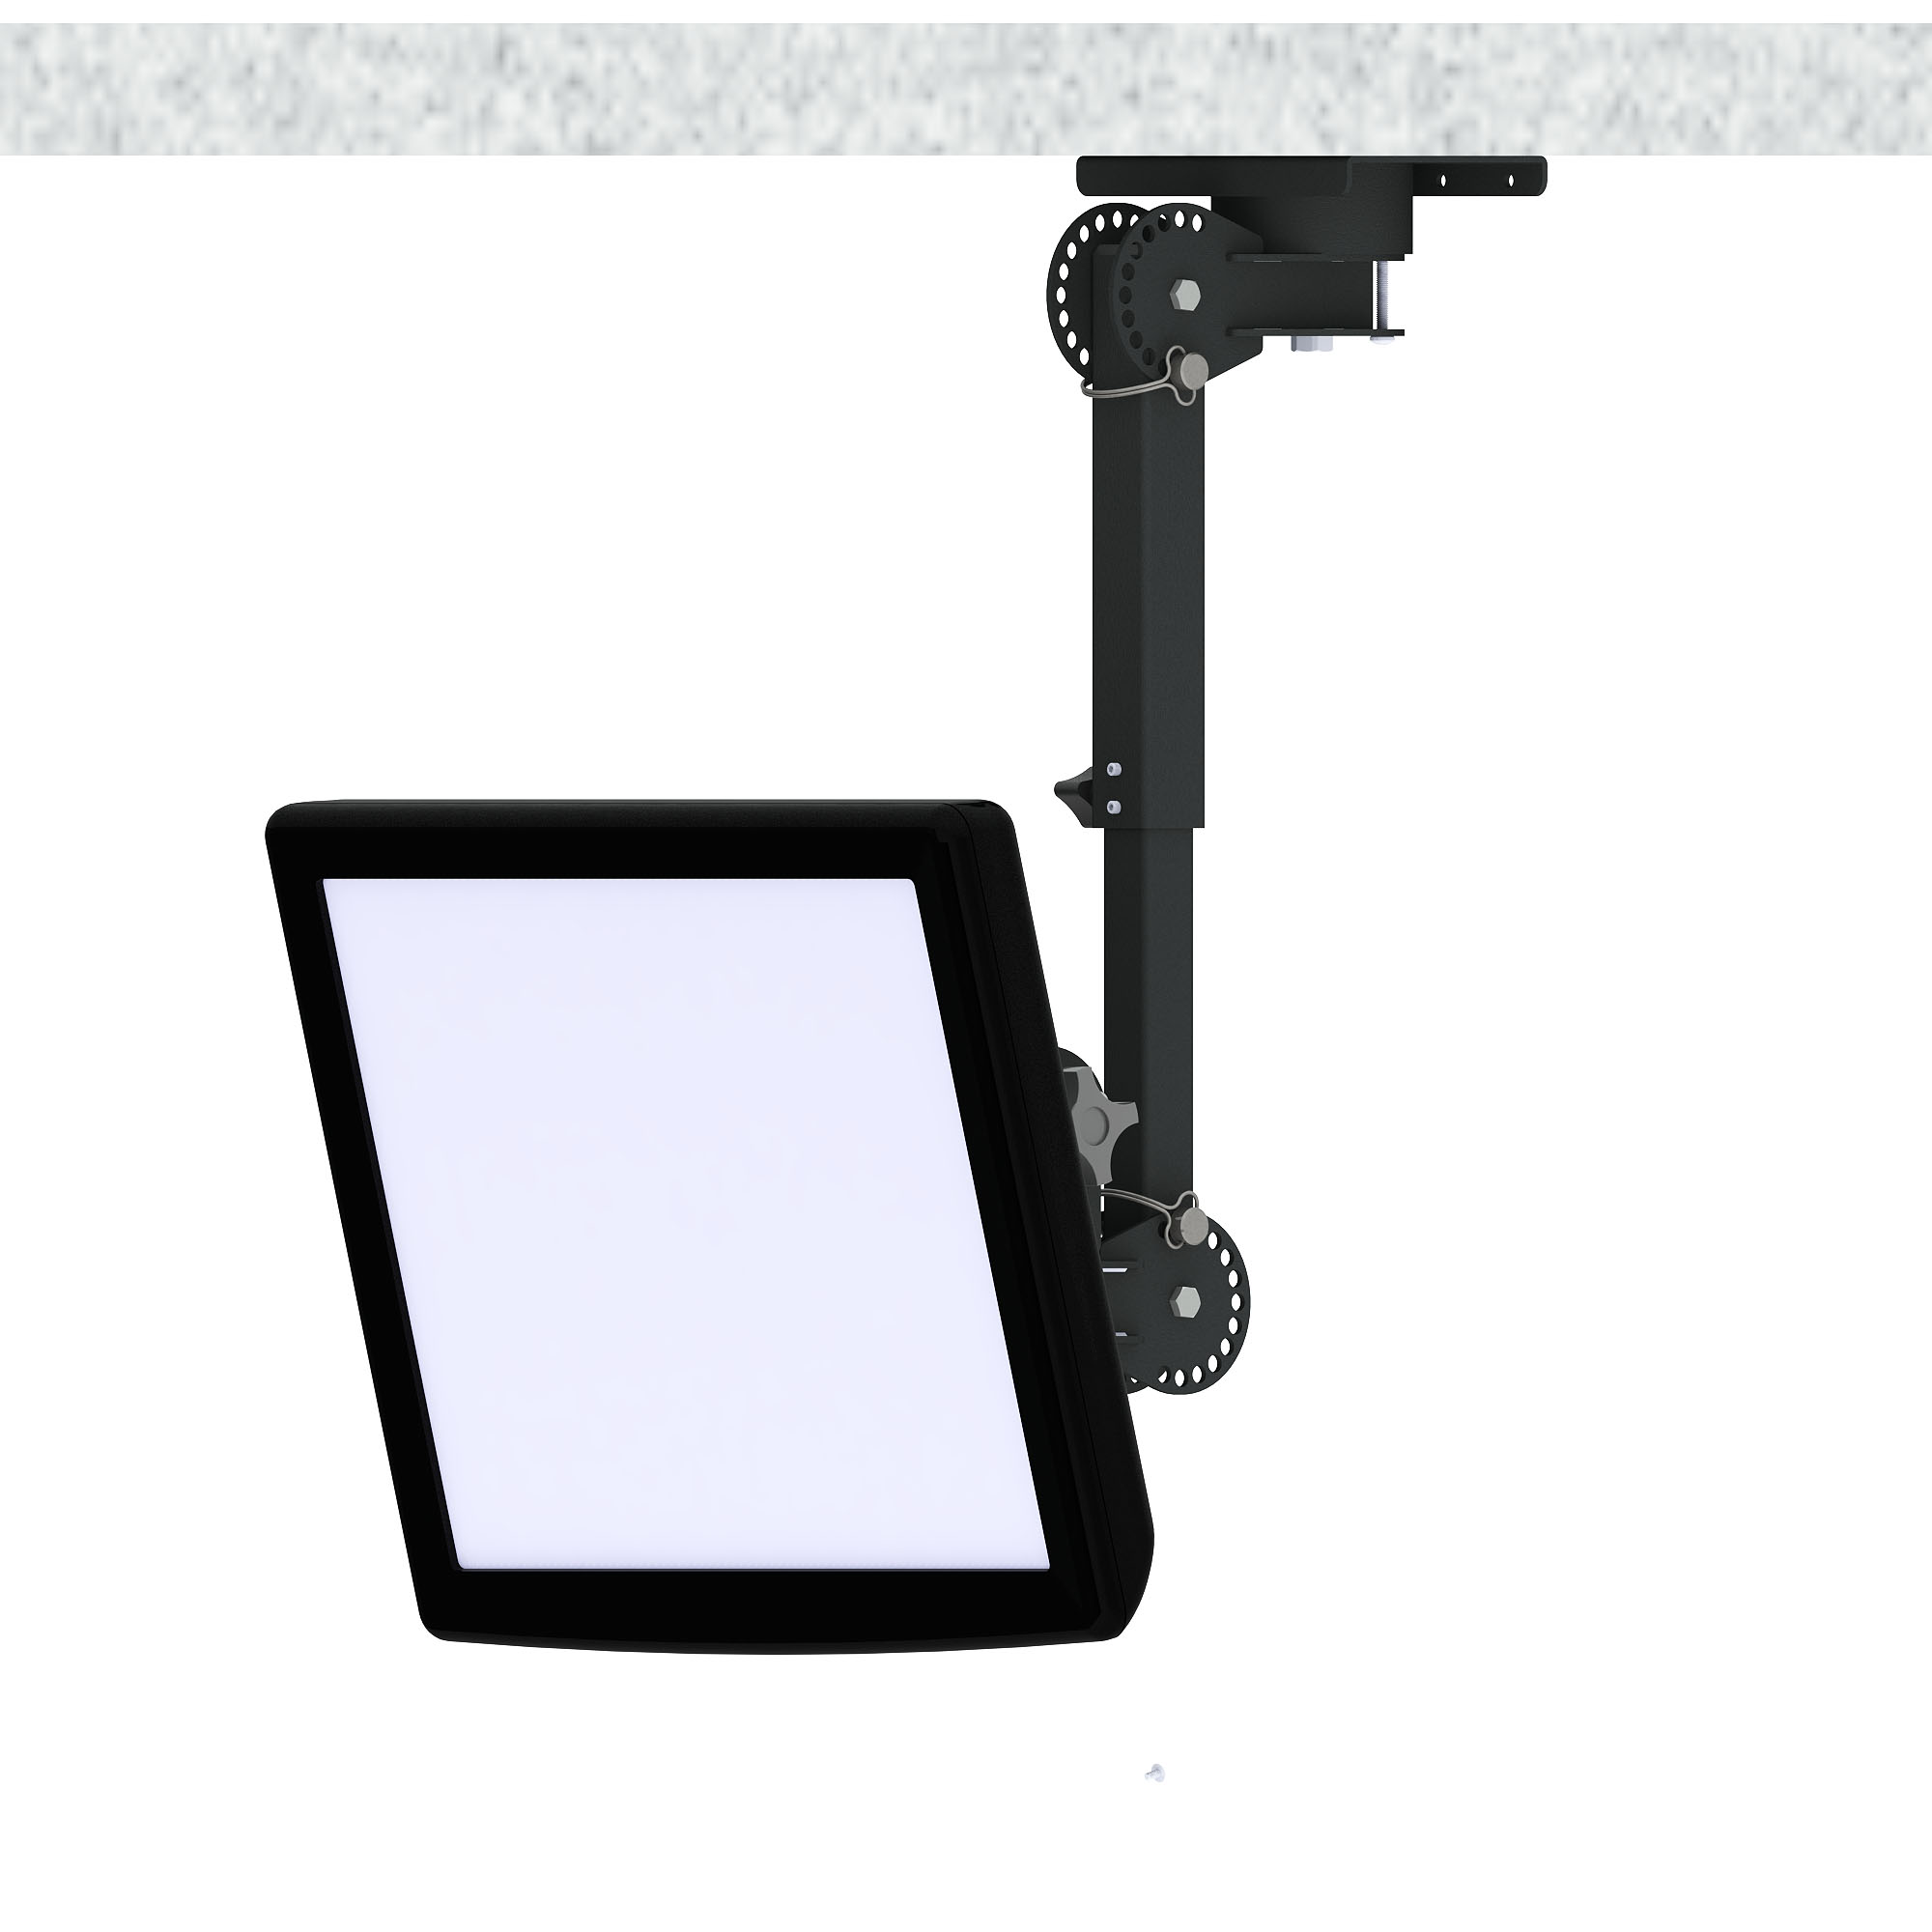 Ceiling Mounting Systems for Screens, POS Printers and Peripherals